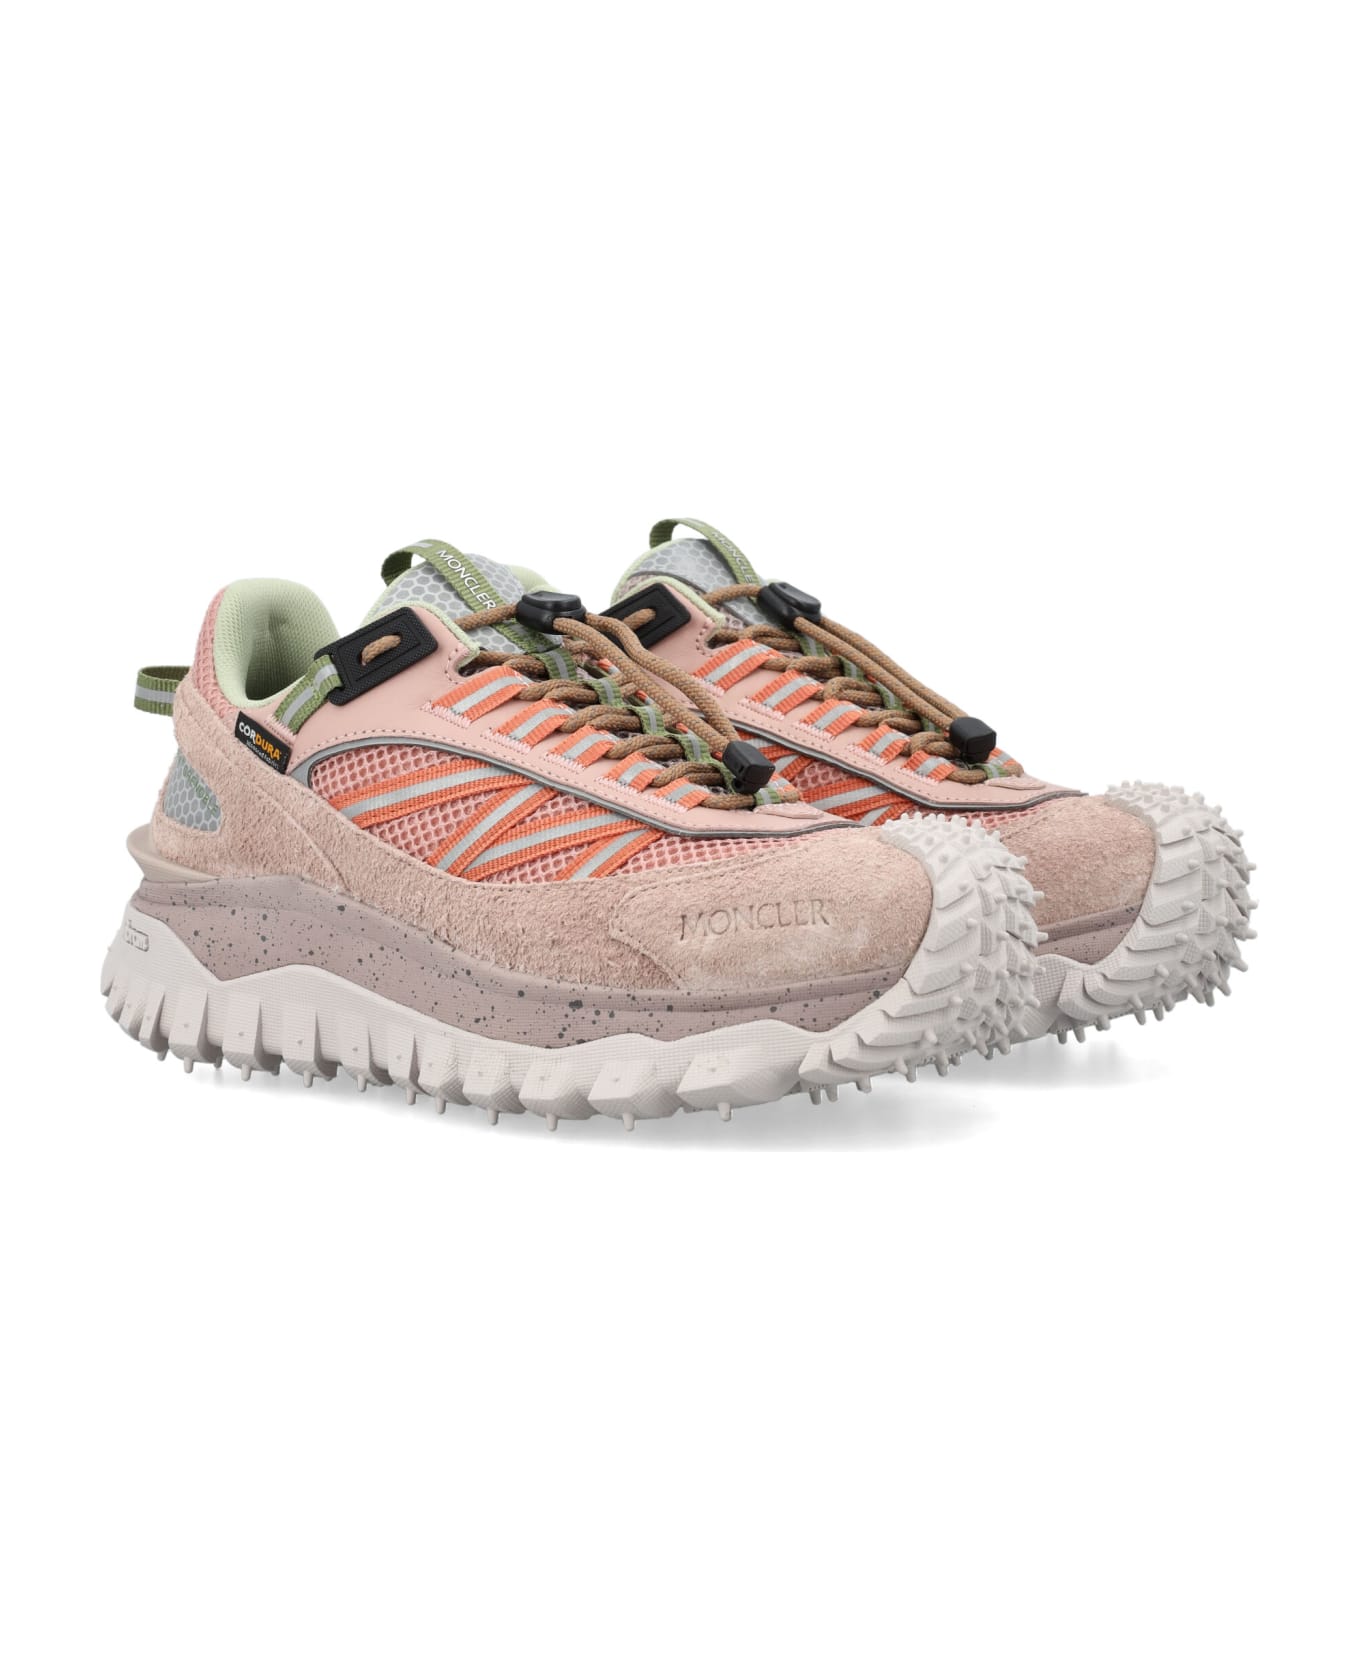 Moncler Trailgrip Trainers - PINK